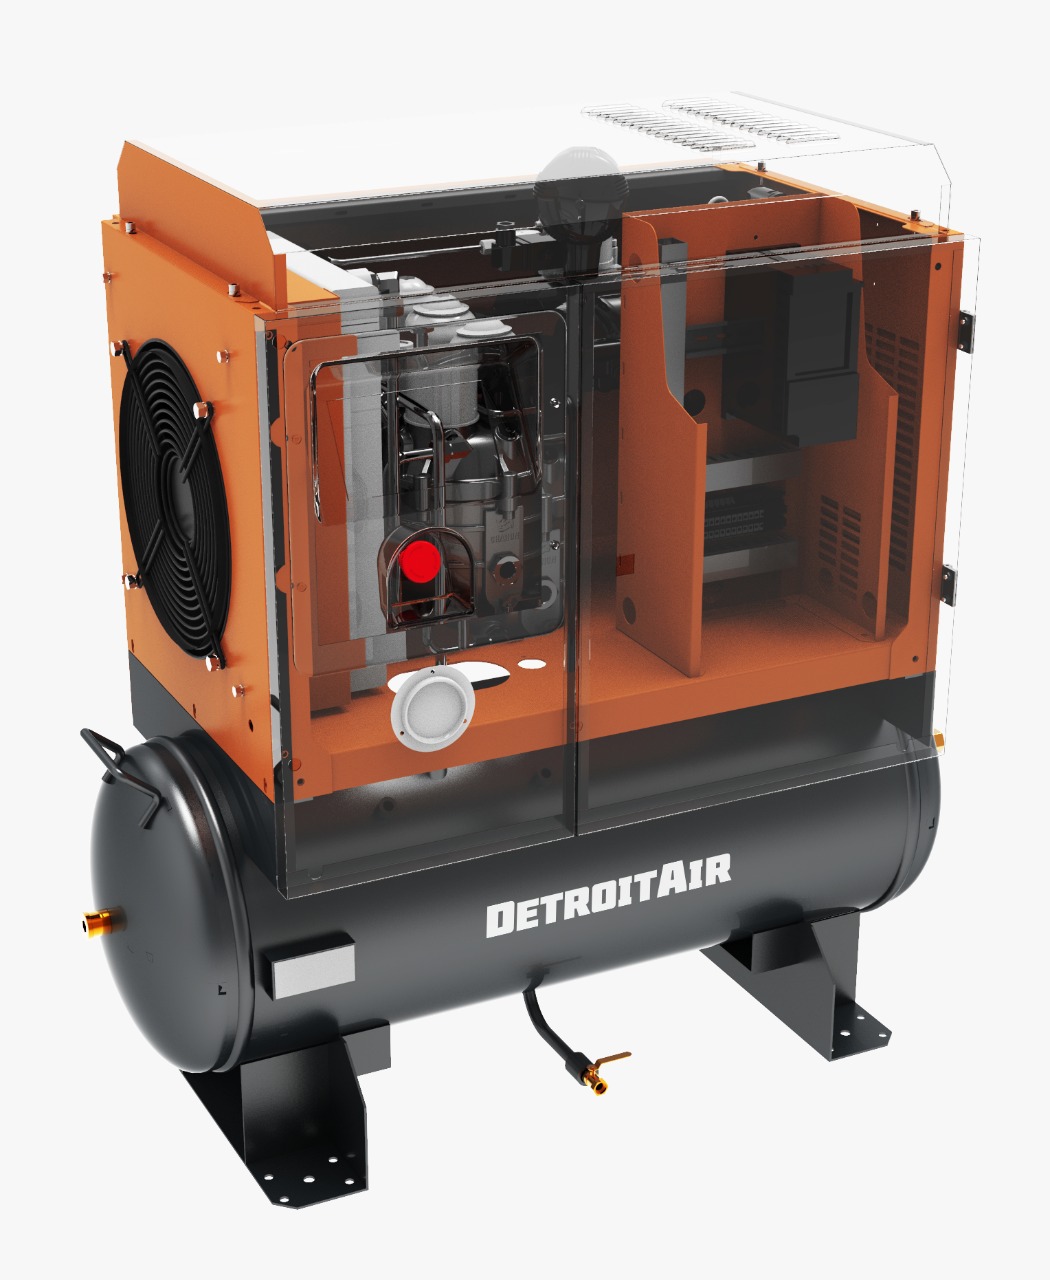 Air Compressor DETROIT Rotary Screw 7.5Hp (5.5kw) 220V Energy Saving Variable Speed Drive